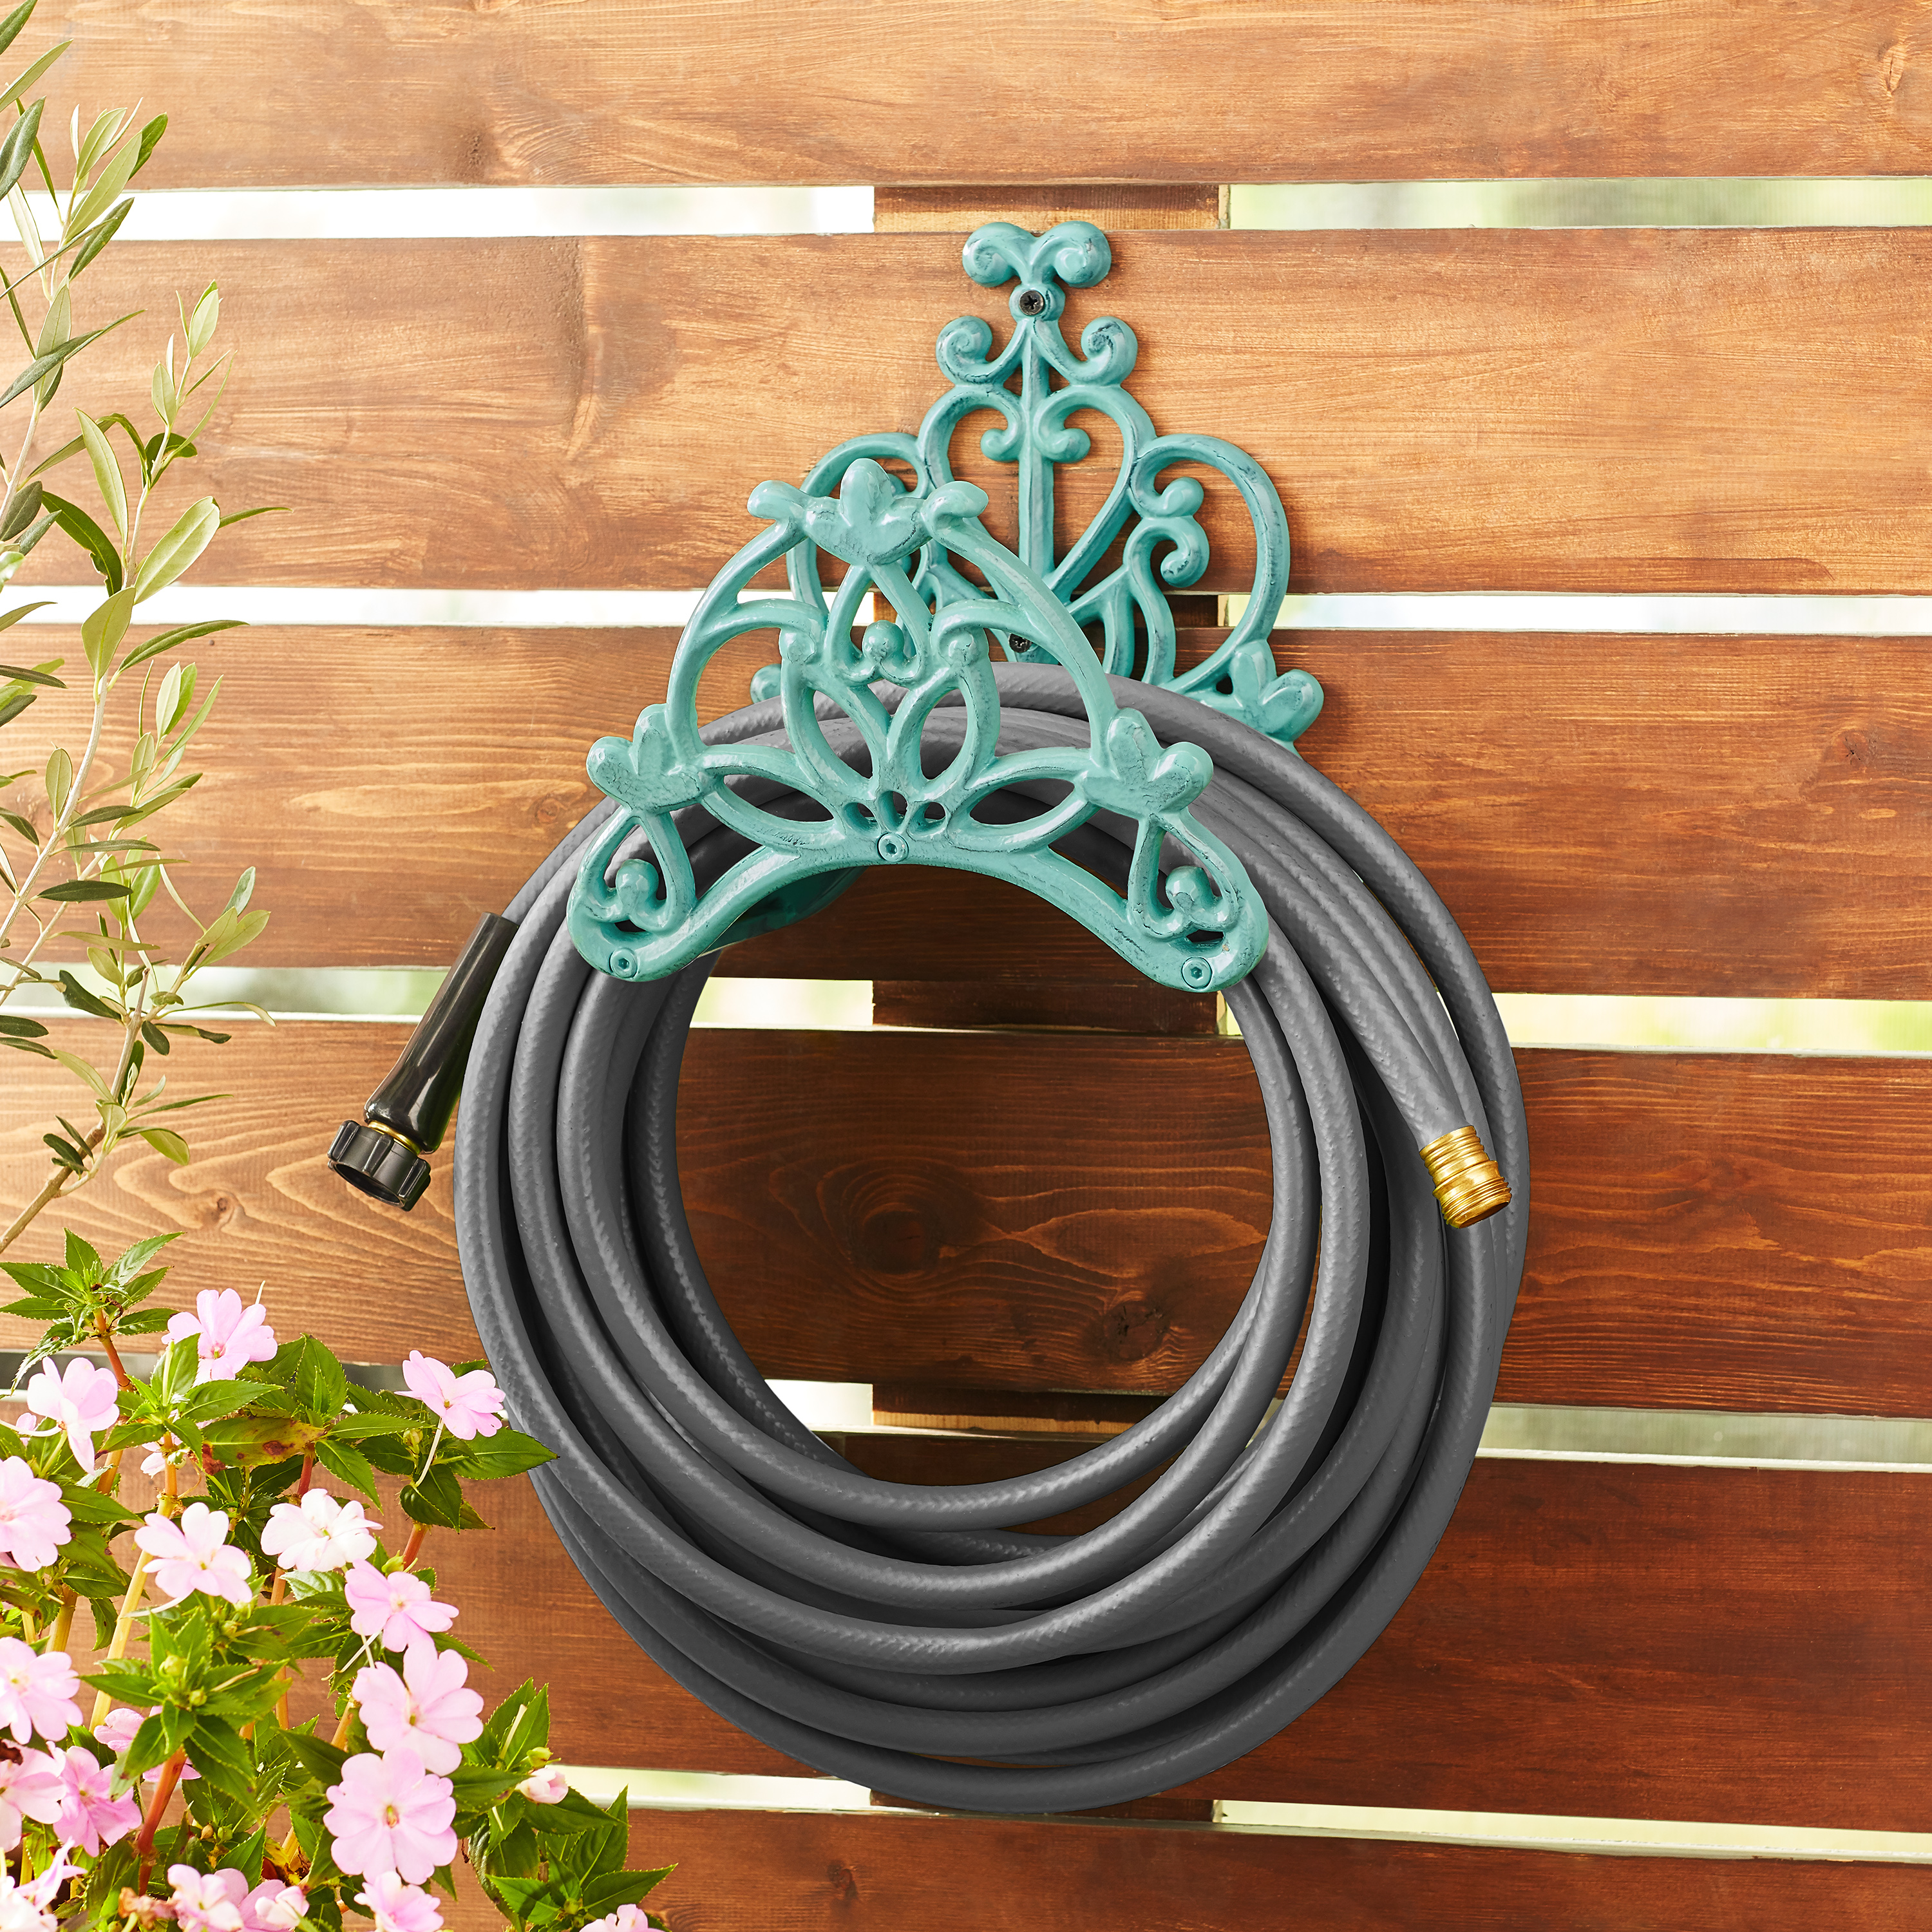 The Pioneer Woman Goldie Decorative Hose Hanger, Teal - image 2 of 7